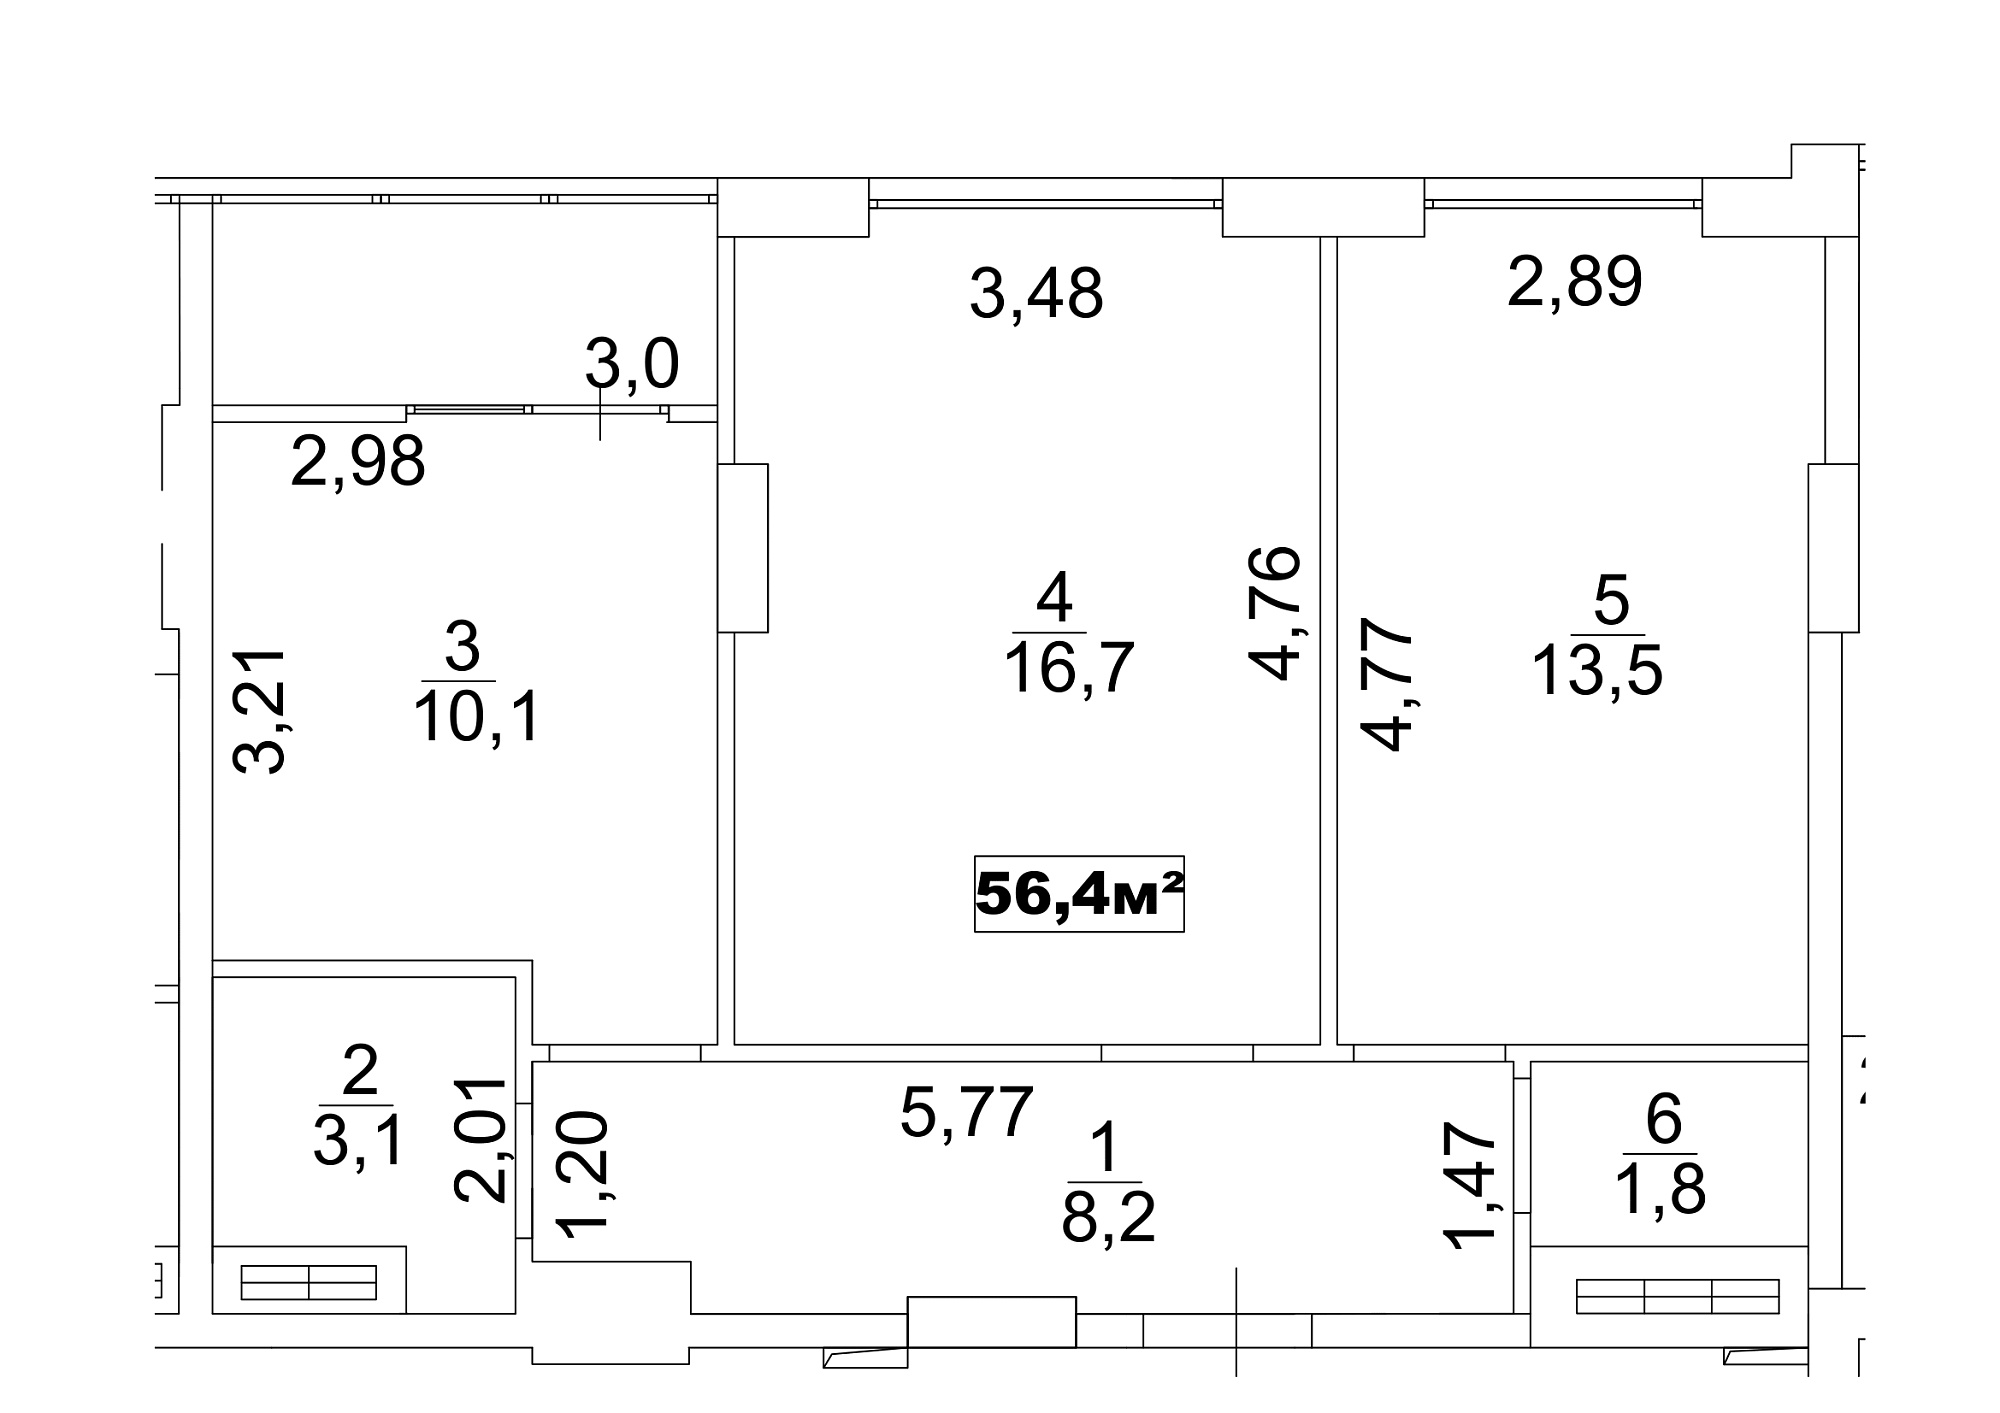 Planning 2-rm flats area 56.4m2, AB-13-09/00073.